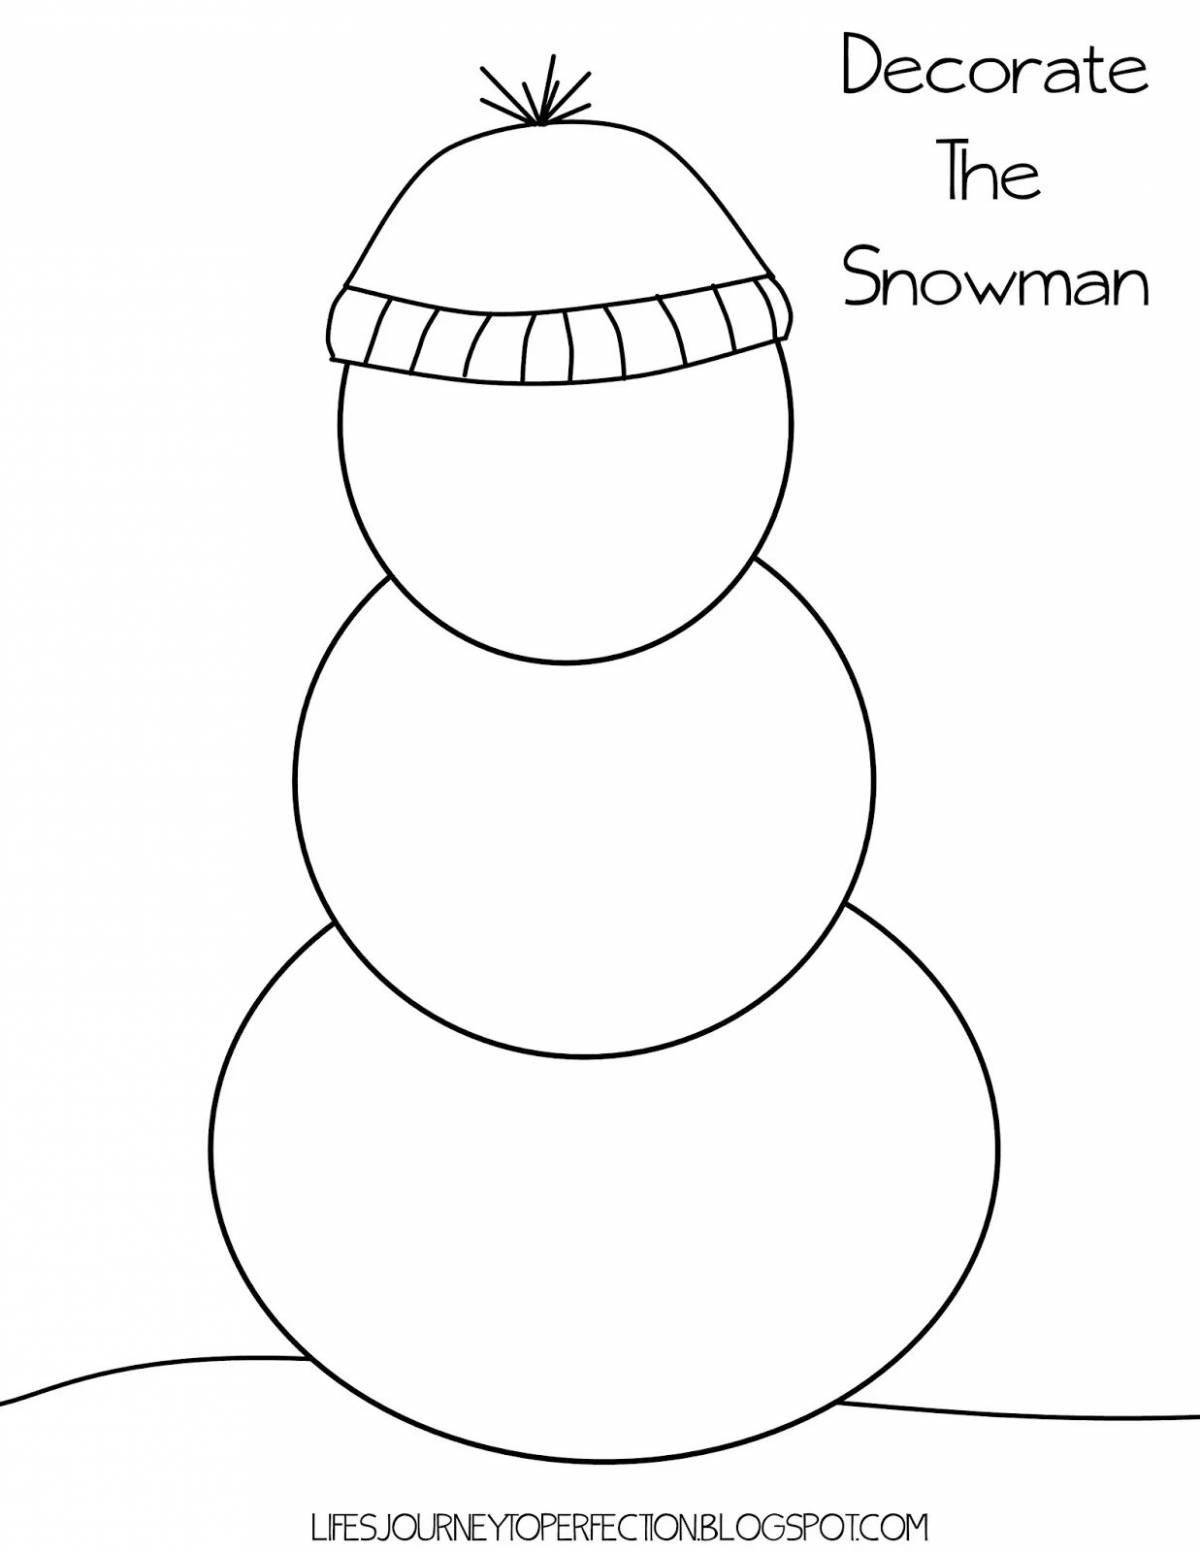 Snowman without nose #4